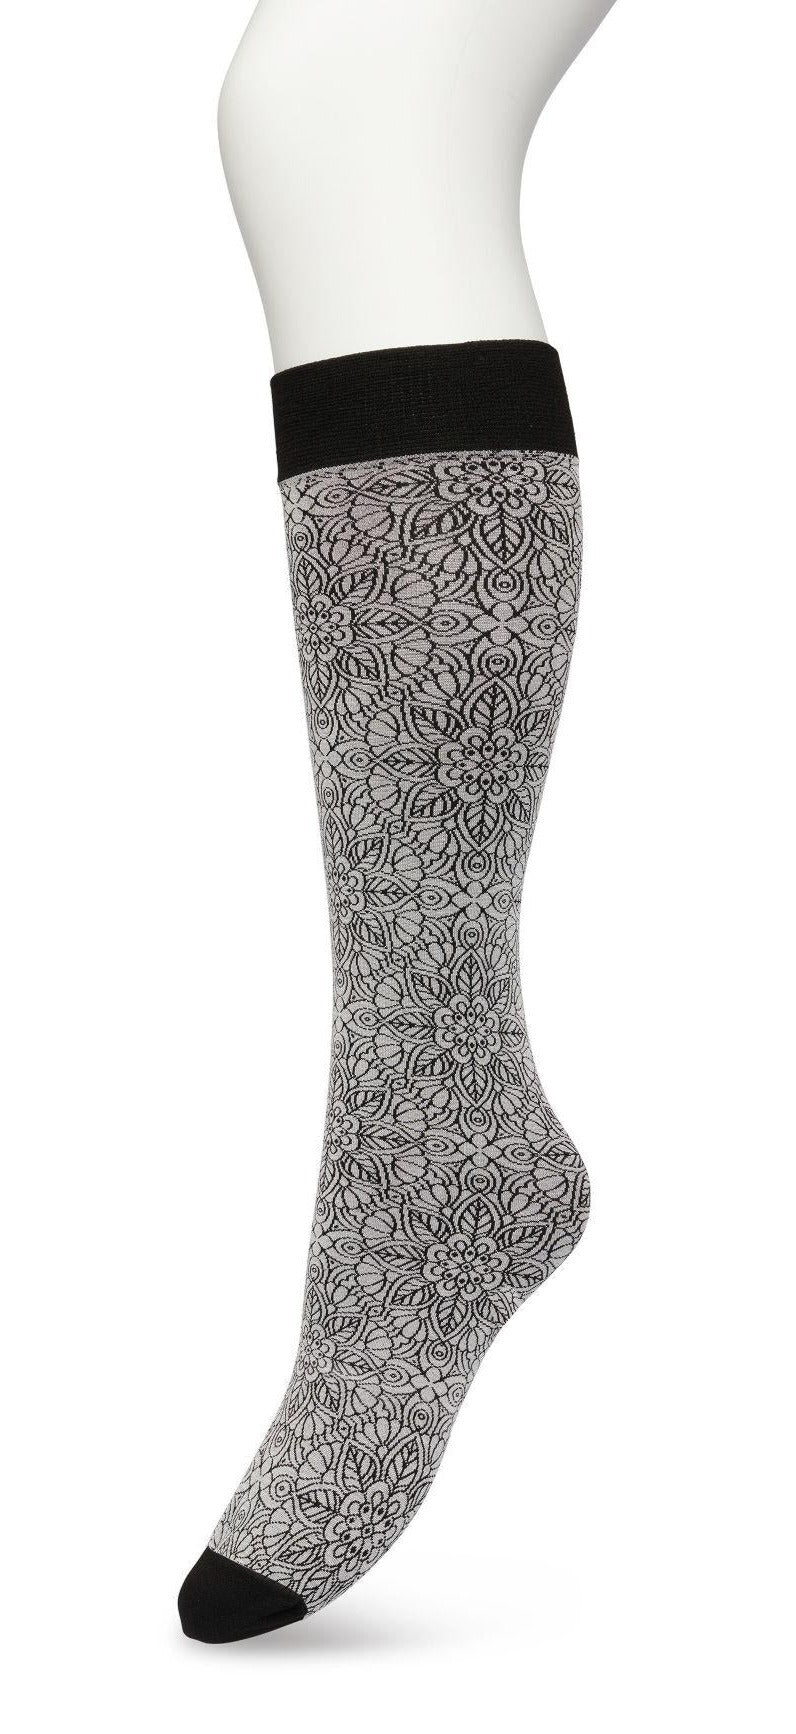 Bonnie Doon Mandala Knee-Highs - Ultra opaque silver grey fashion knee-high glossy socks with a black mandala floral style pattern in black and a deep black comfort cuff.